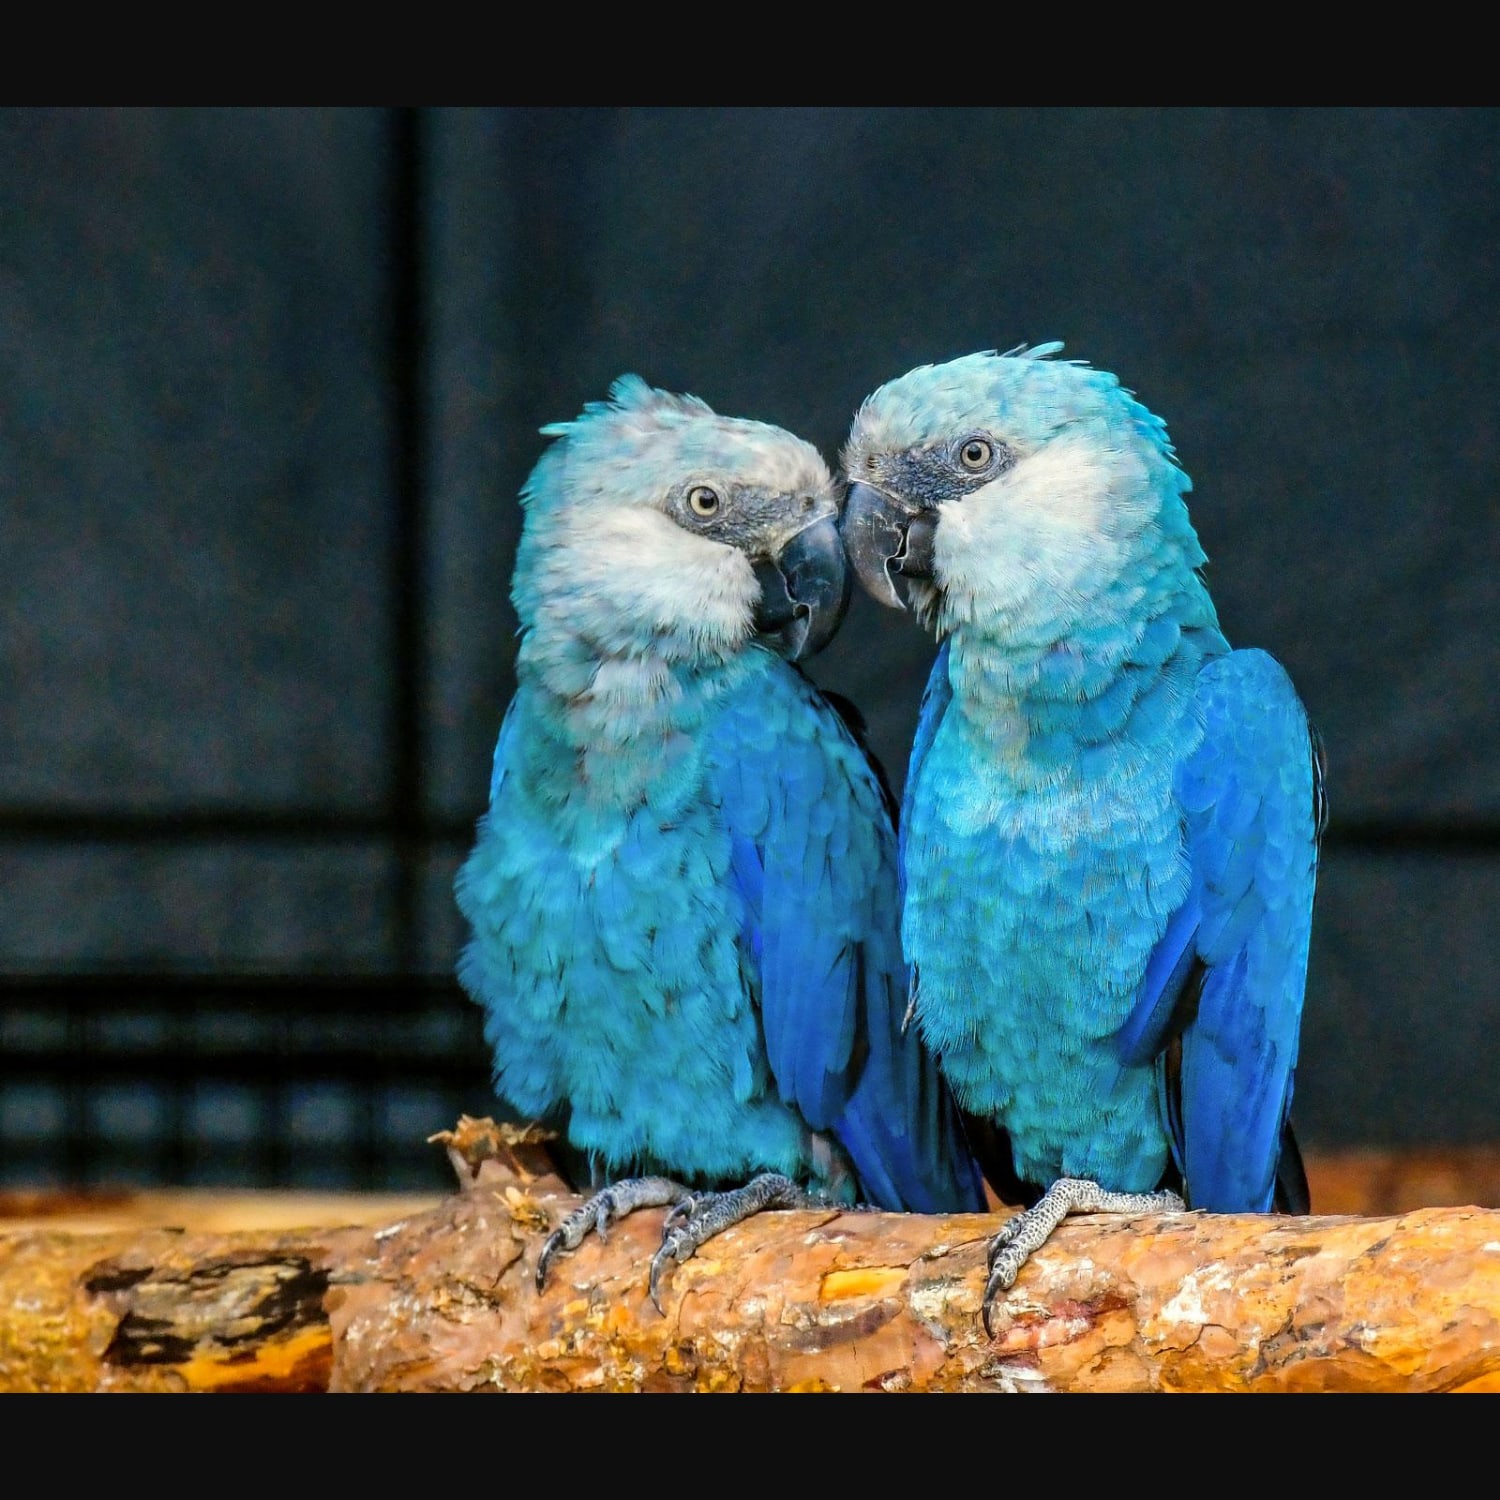 After vanishing in the wild for more than two decades, Spix's macaws have recently been re-introduced back into their native Brazil after an ambitious and successful breeding program. They are also called little blue macaws, and their weight averages around 300 grams (11 oz).